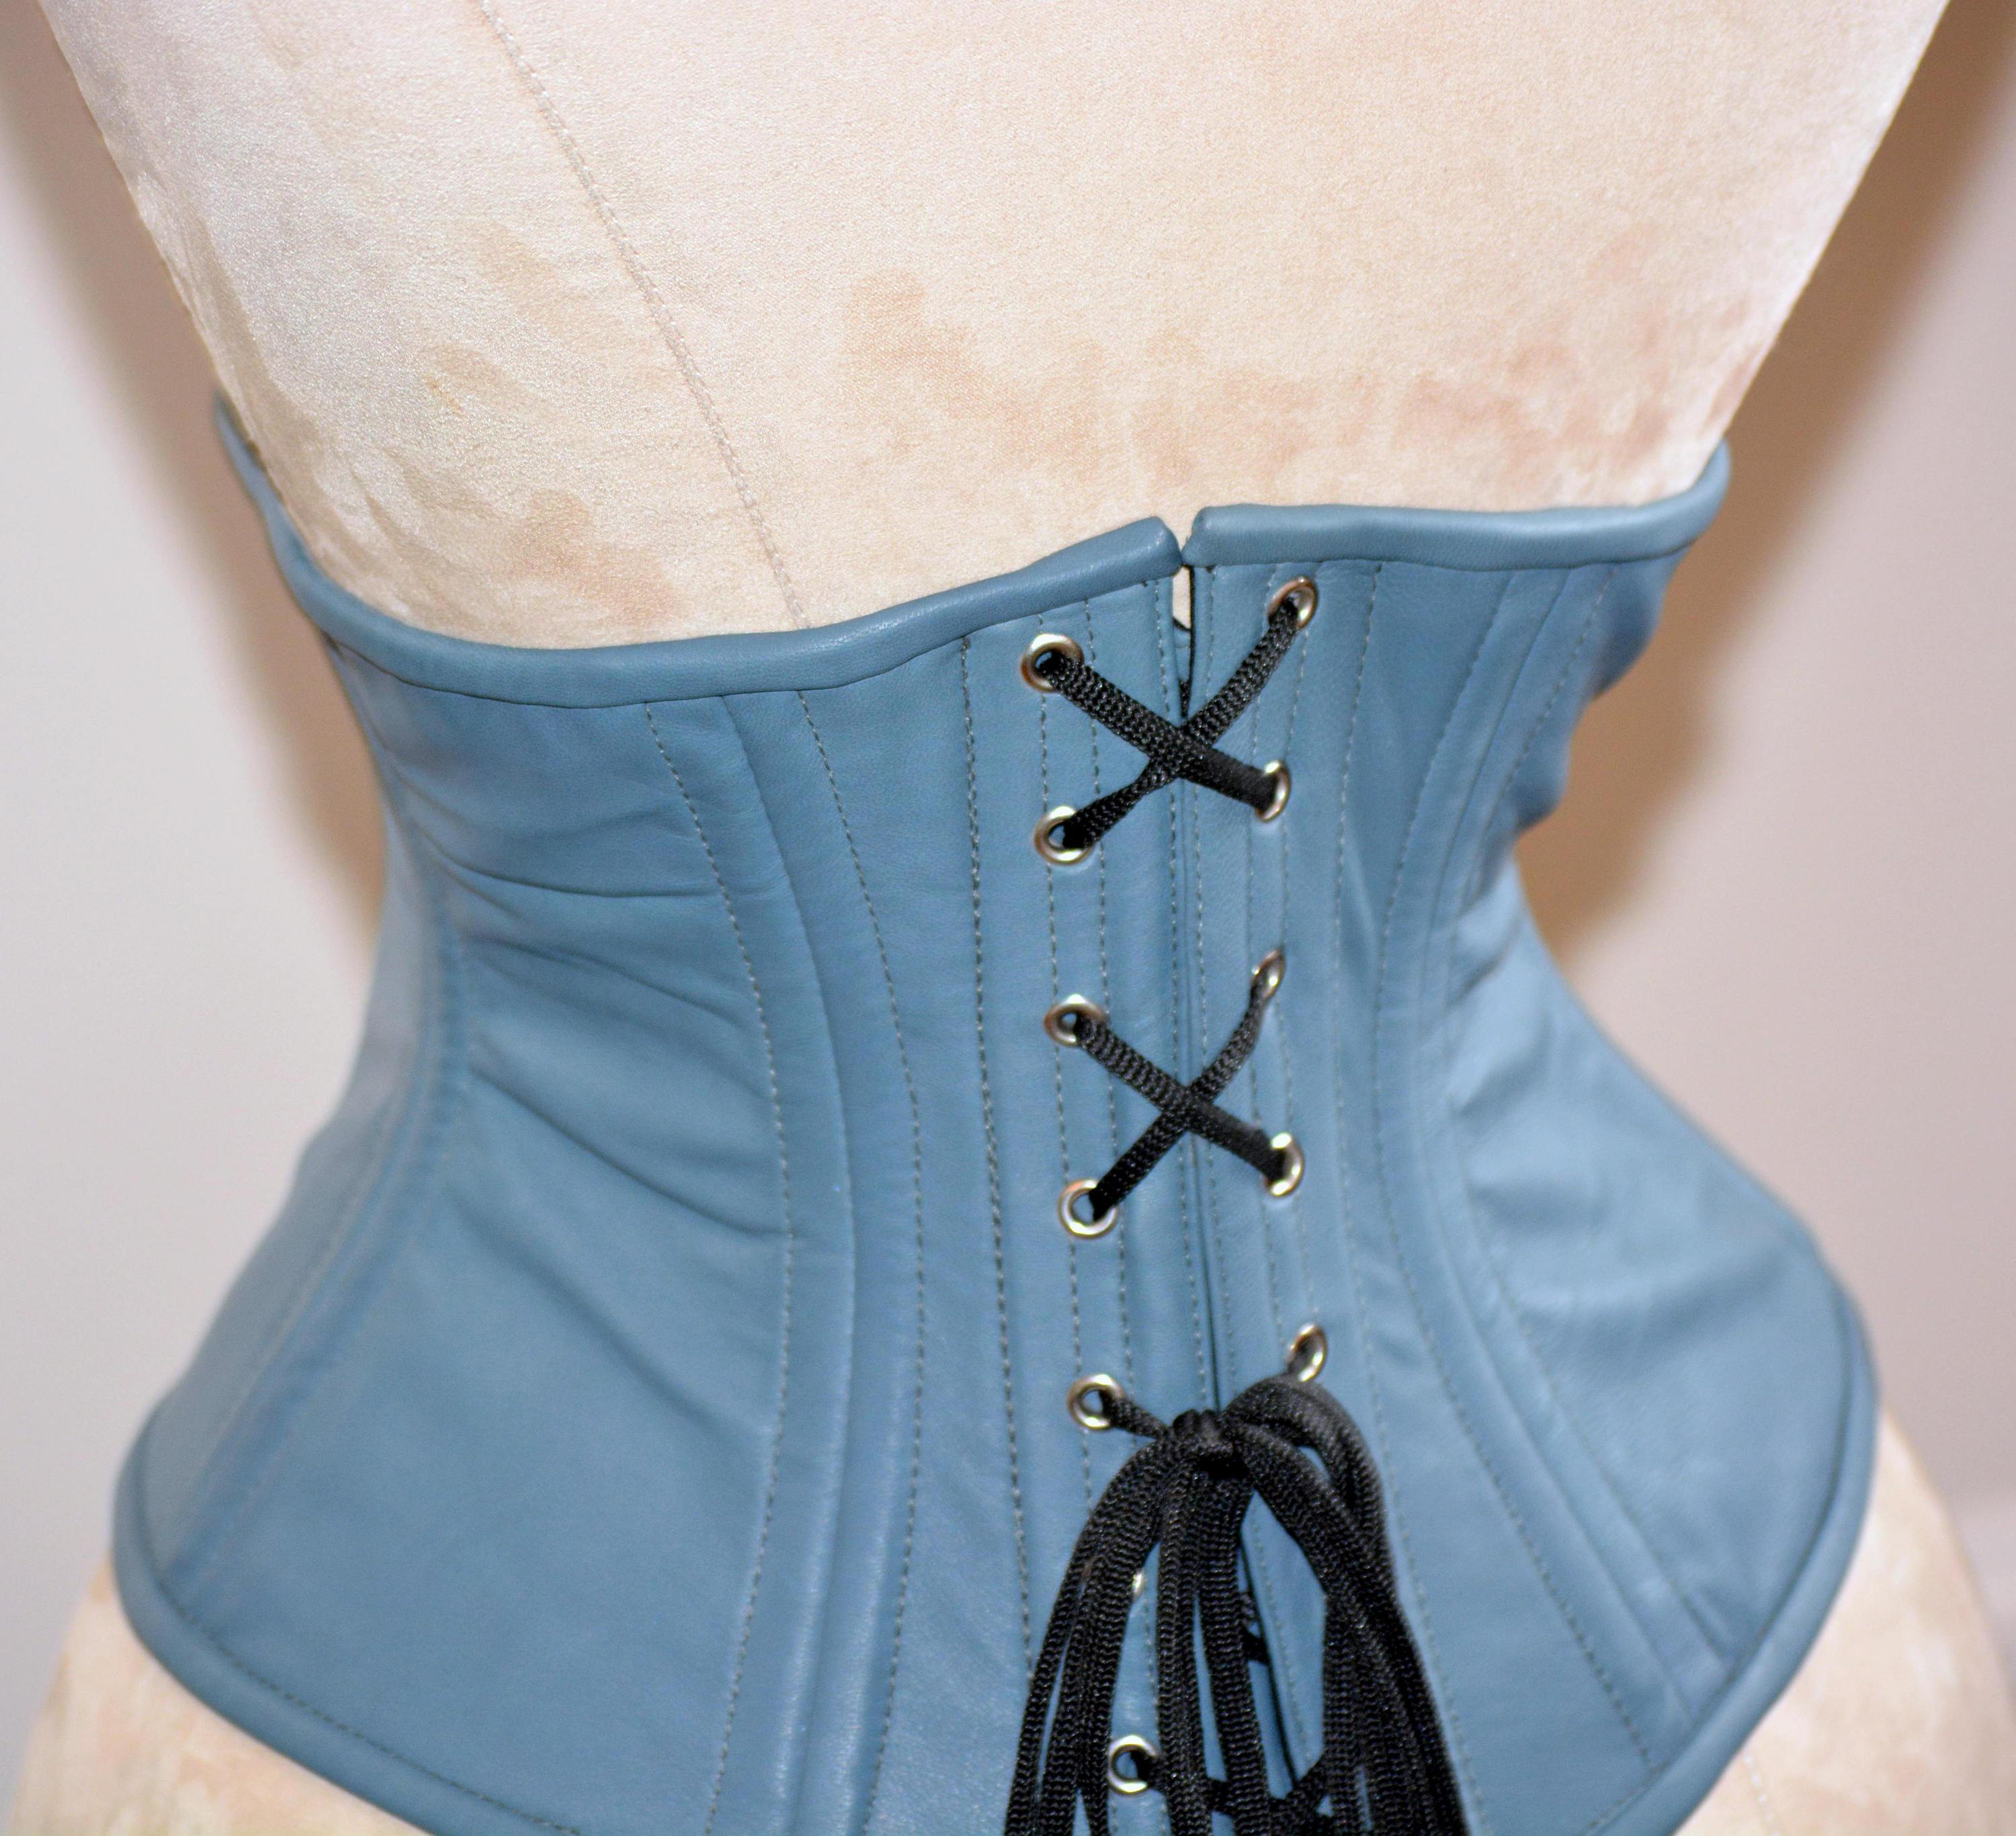 Our Maroon Underbust Corset is the Most Popular Style in the World